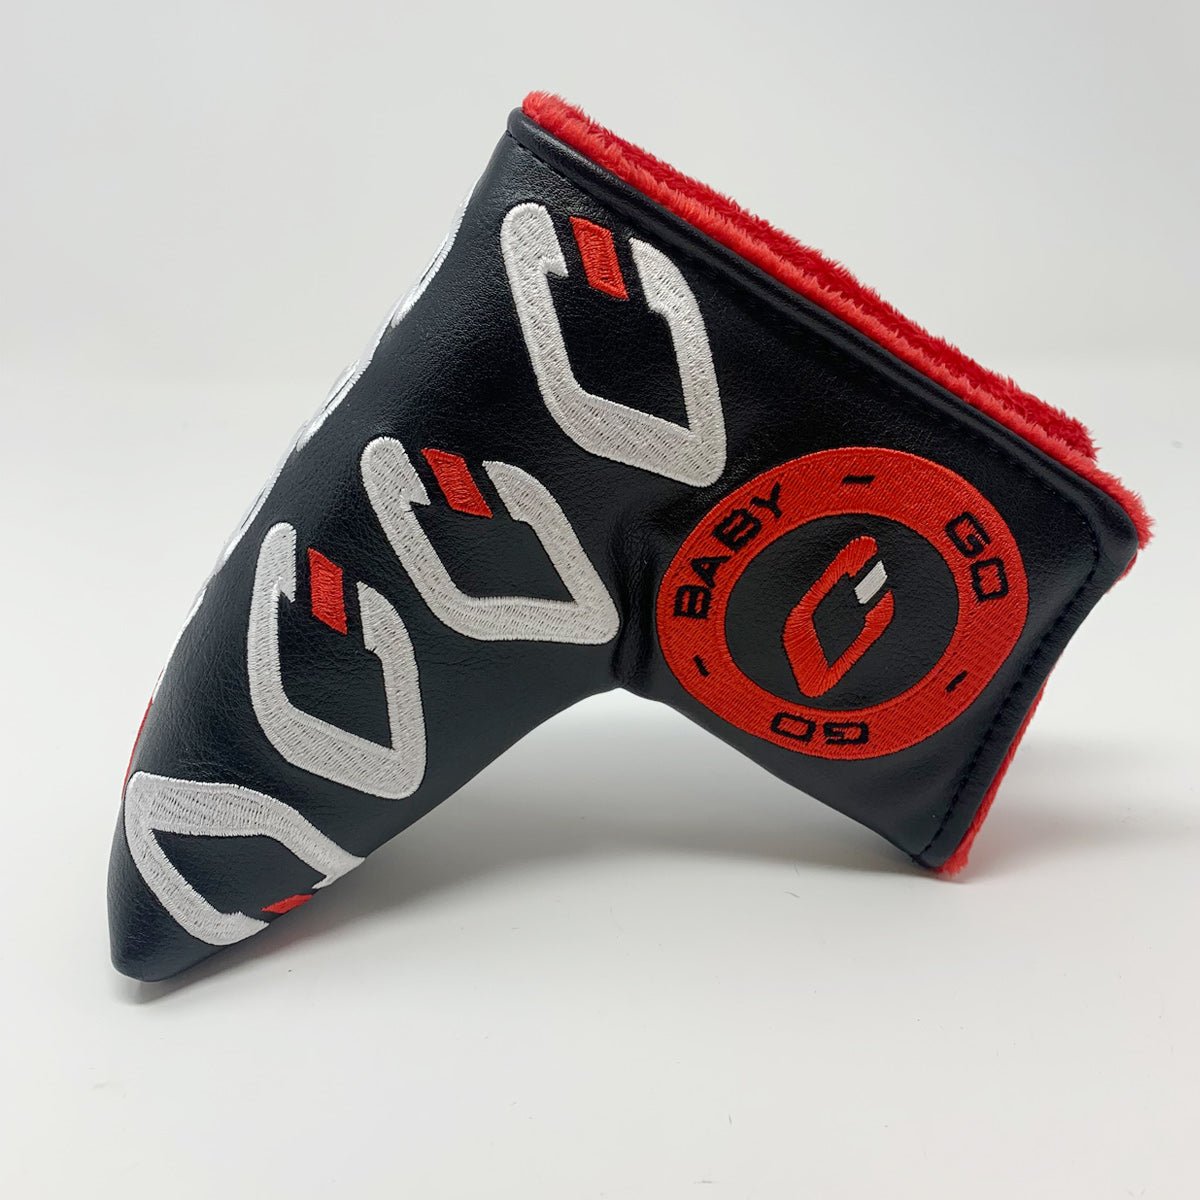 PROTOCONCEPT Golf, Putter cover - 3